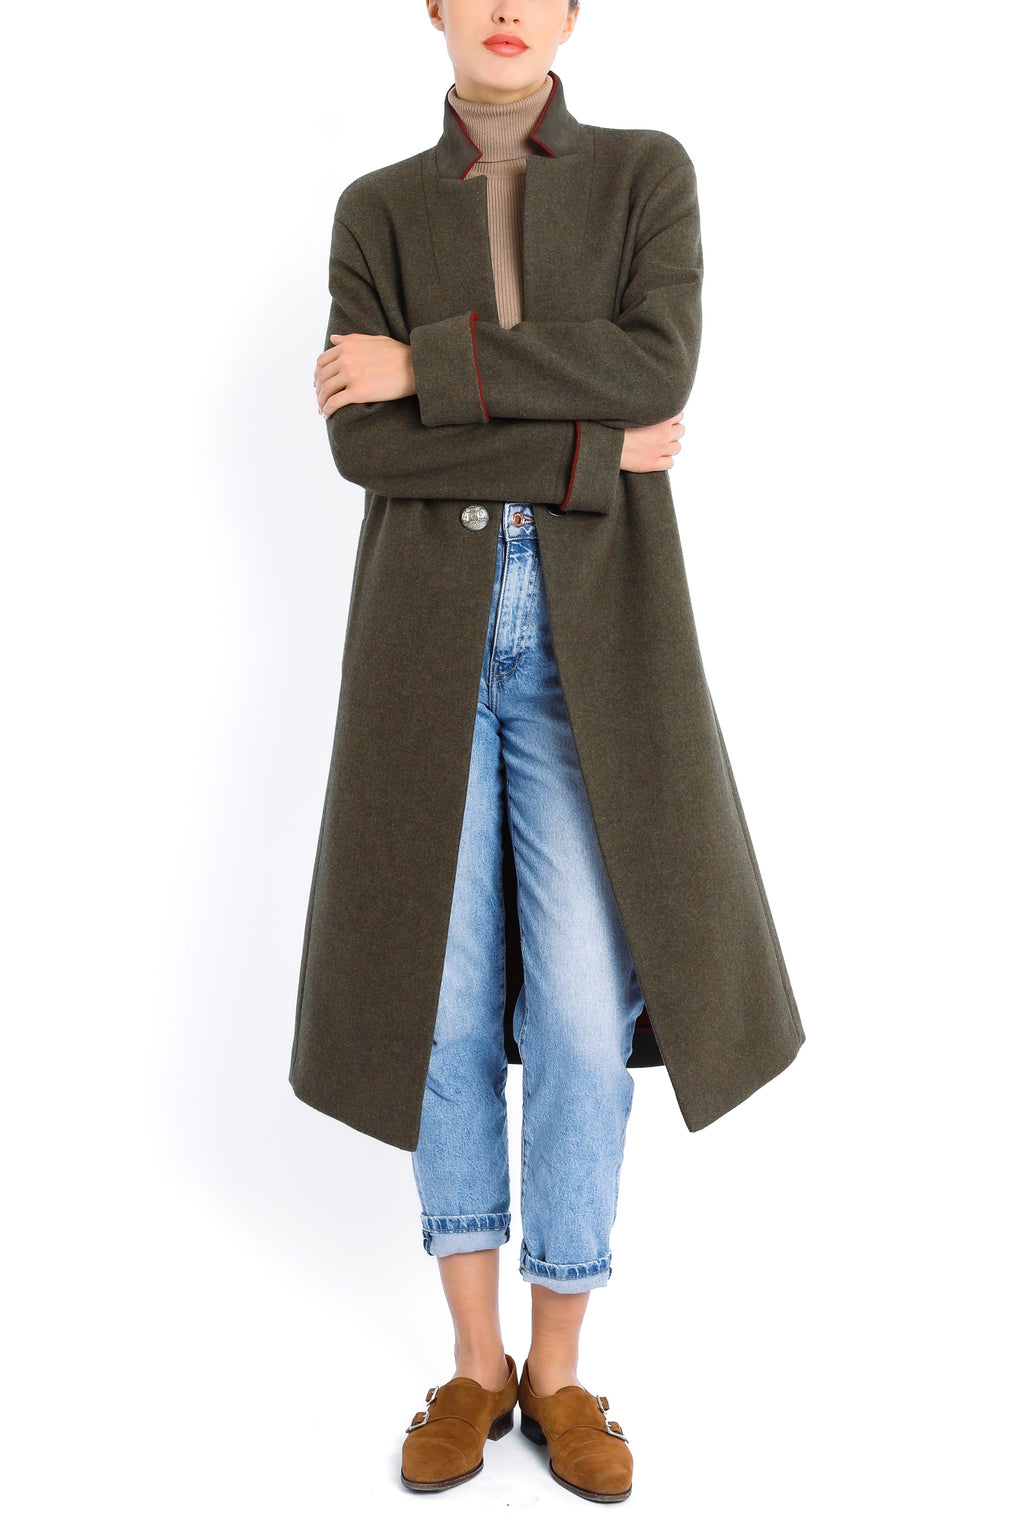 Coat from double-face loden in olive and red